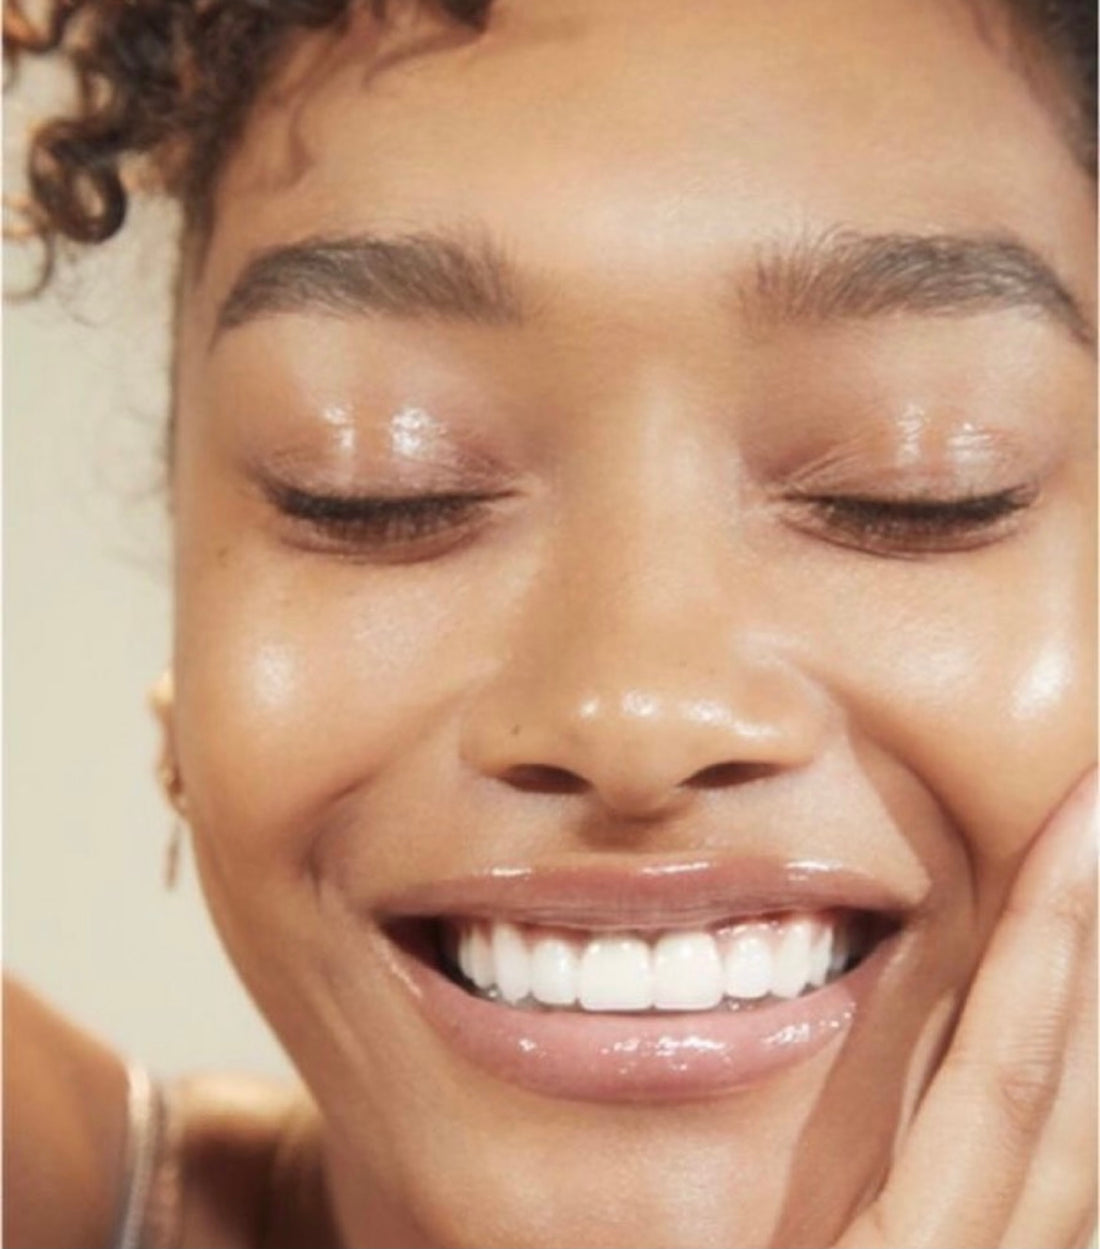 How to apply makeup to parched skin